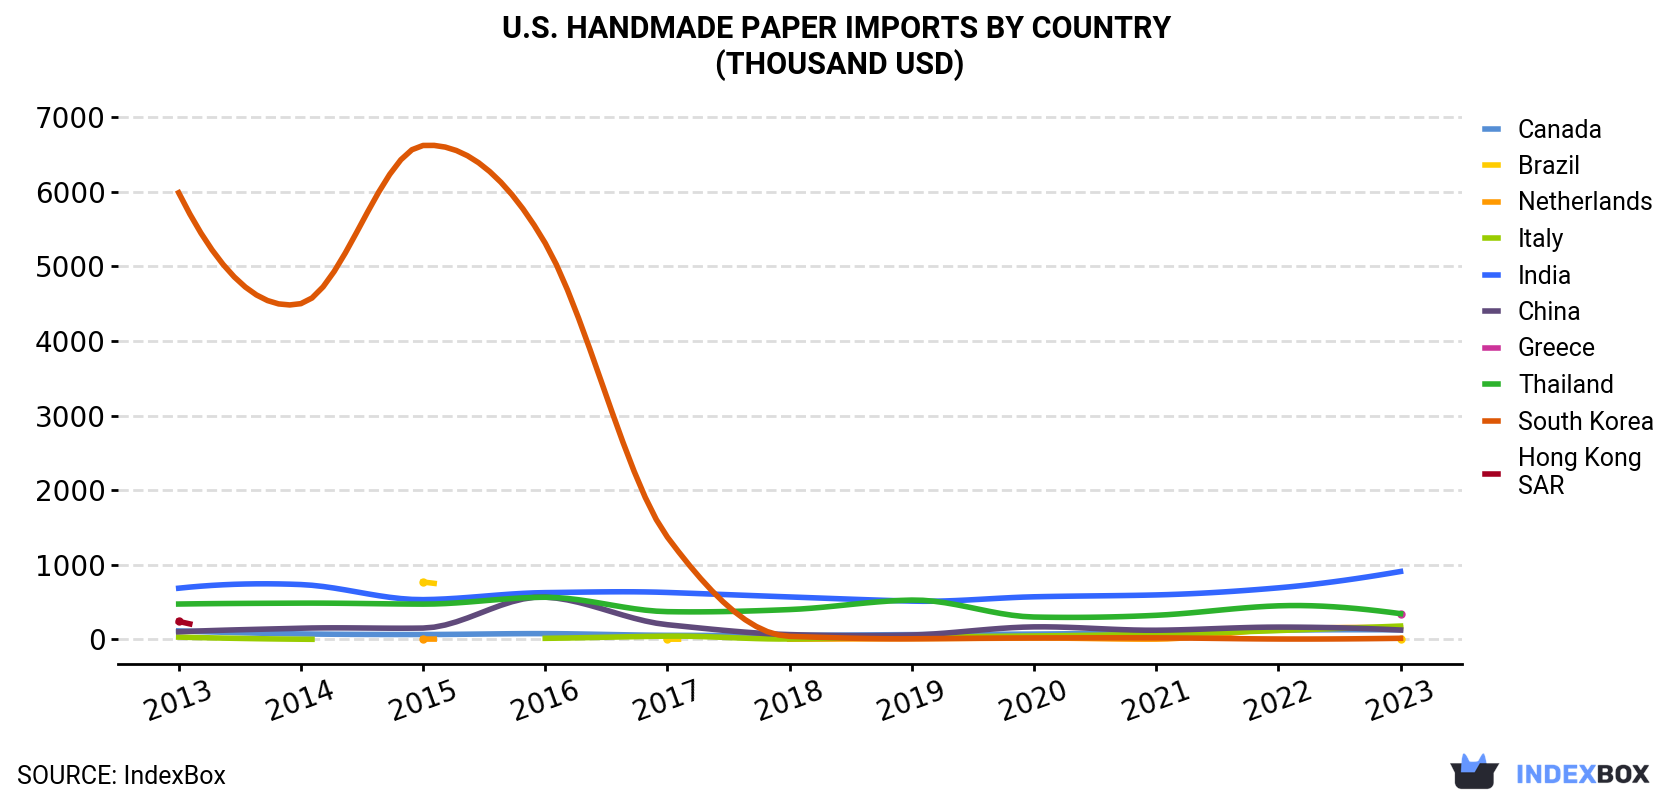 U.S. Handmade Paper Imports By Country (Thousand USD)